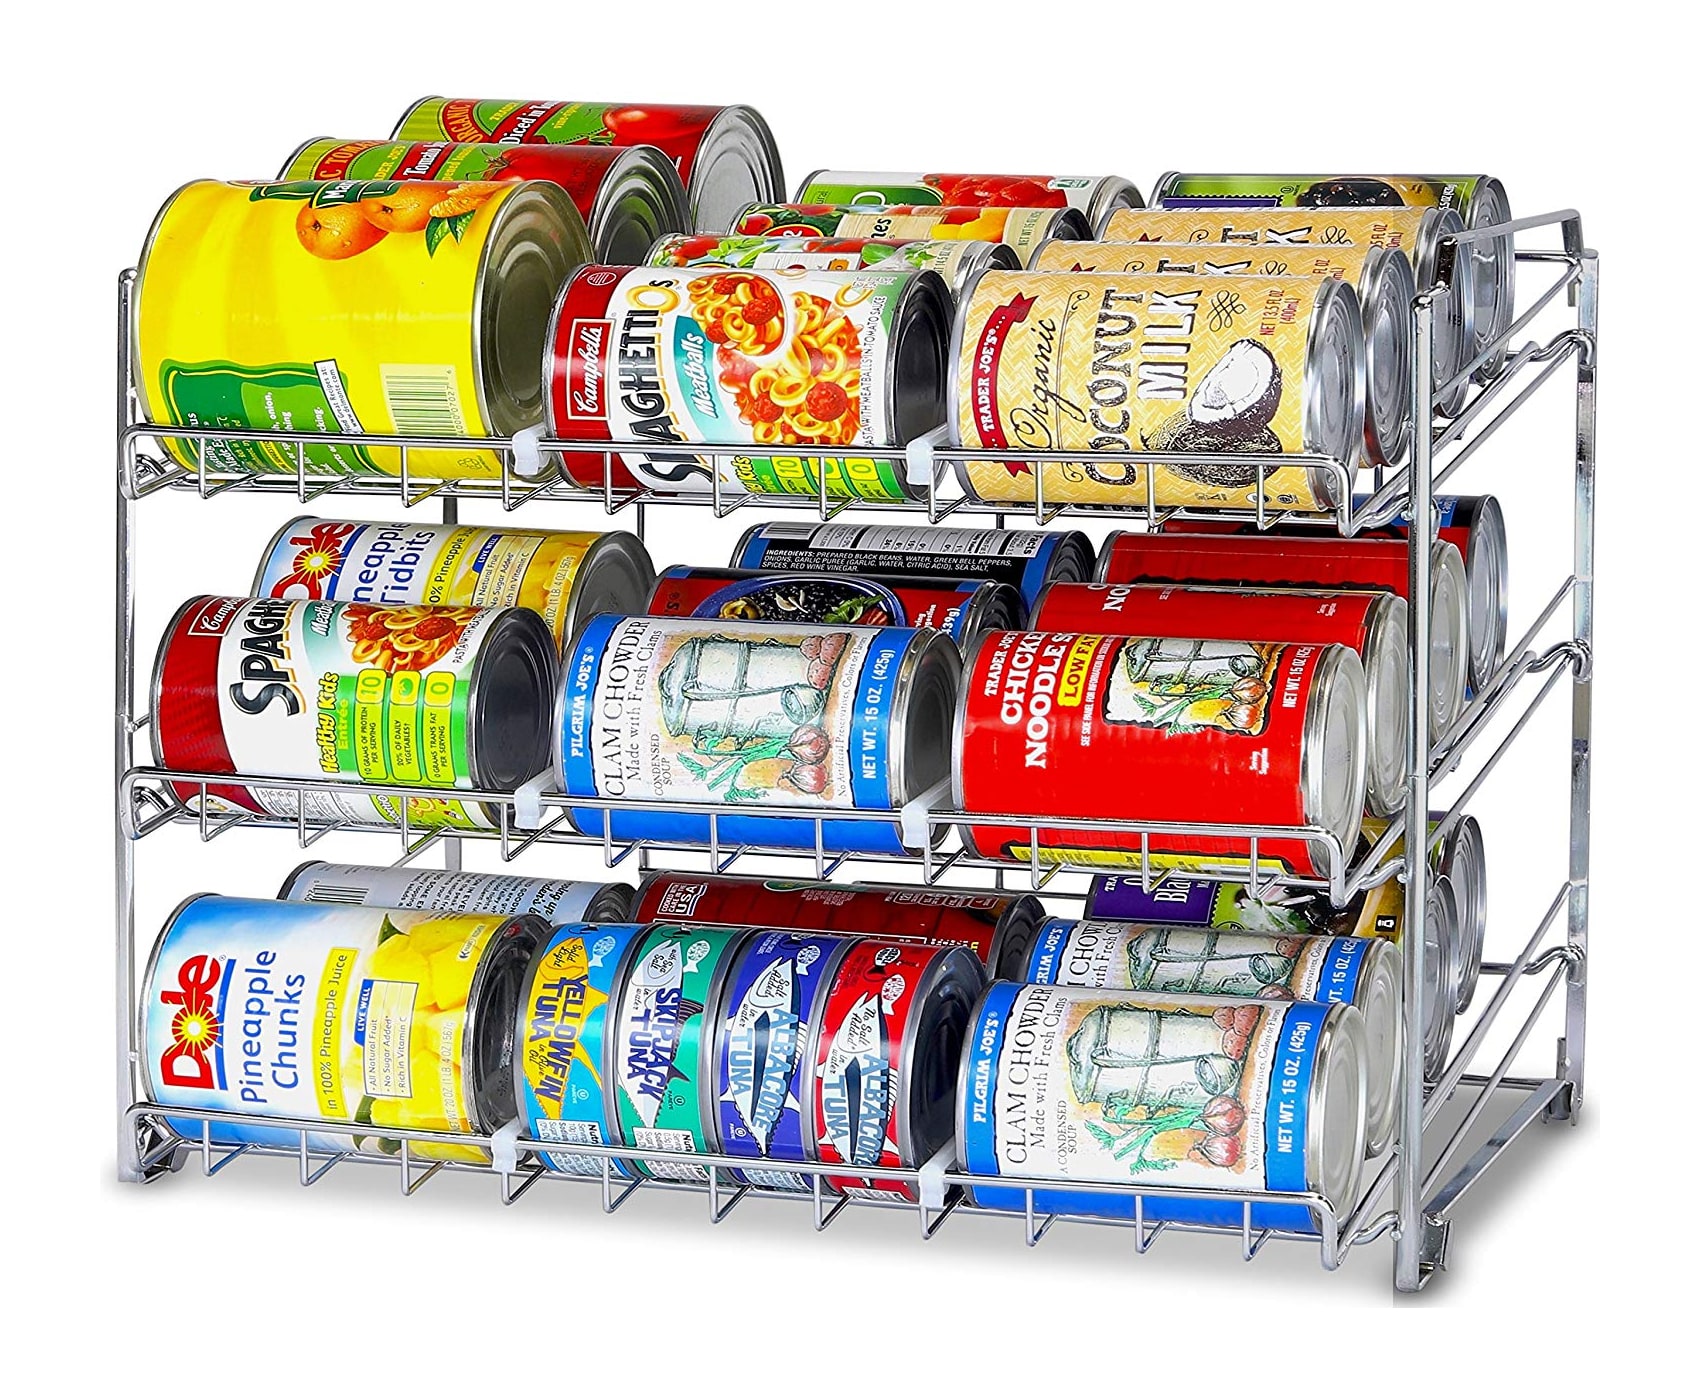 Canned Goods Storage - House of Hepworths